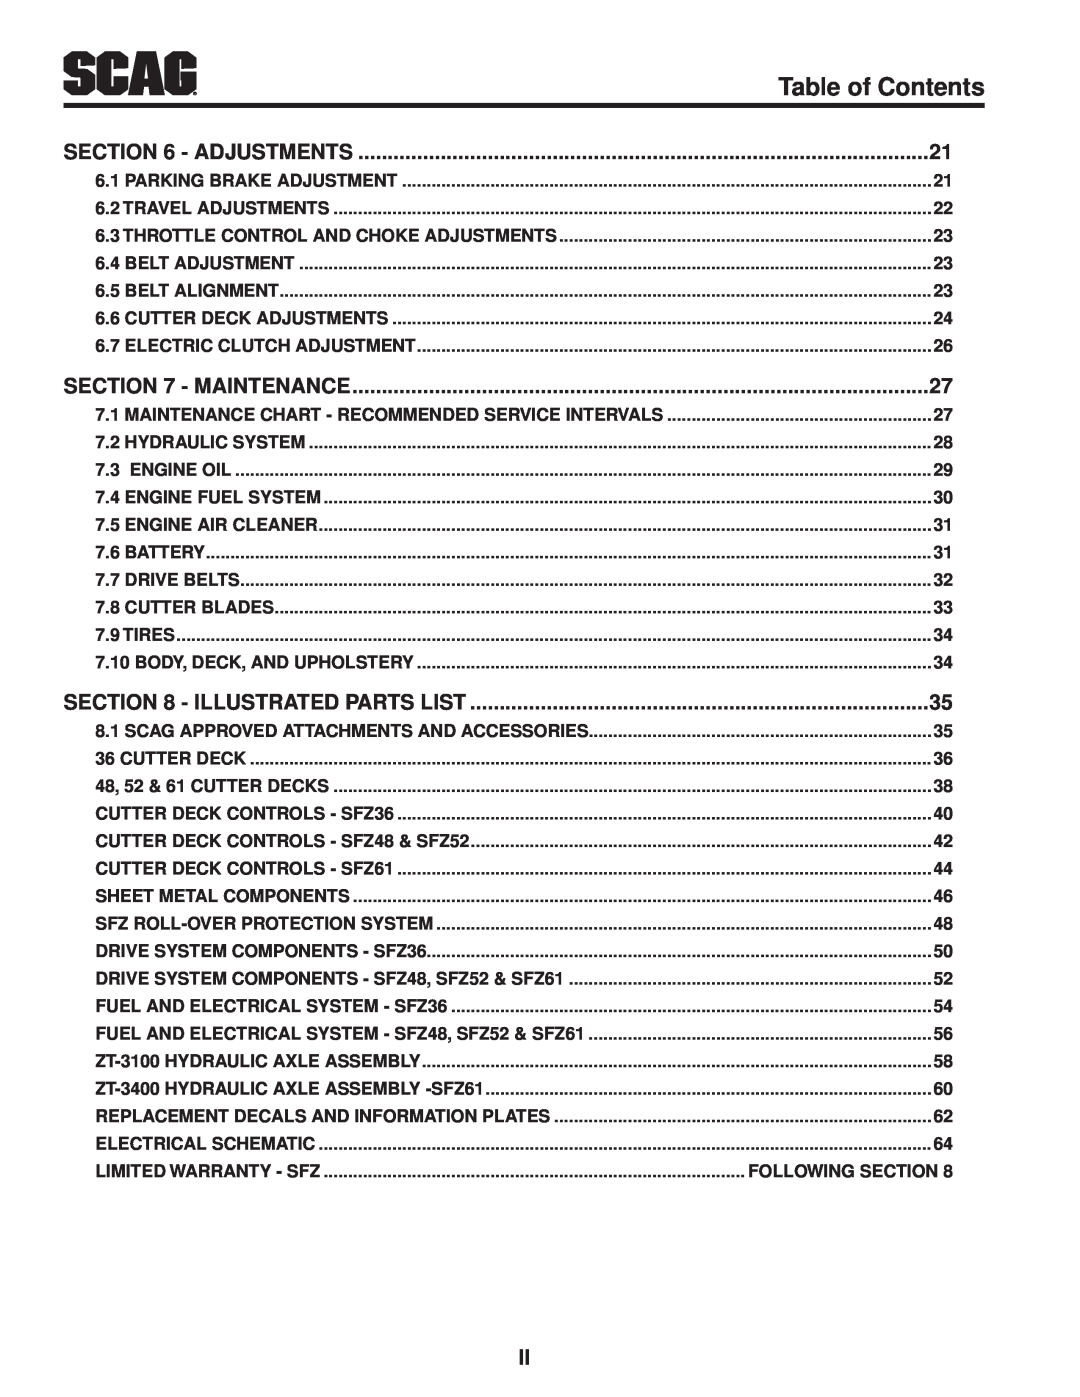 Scag Power Equipment SFZ61-28BS Table of Contents, Throttle Control and Choke Adjustments, electric clutch adjustment 